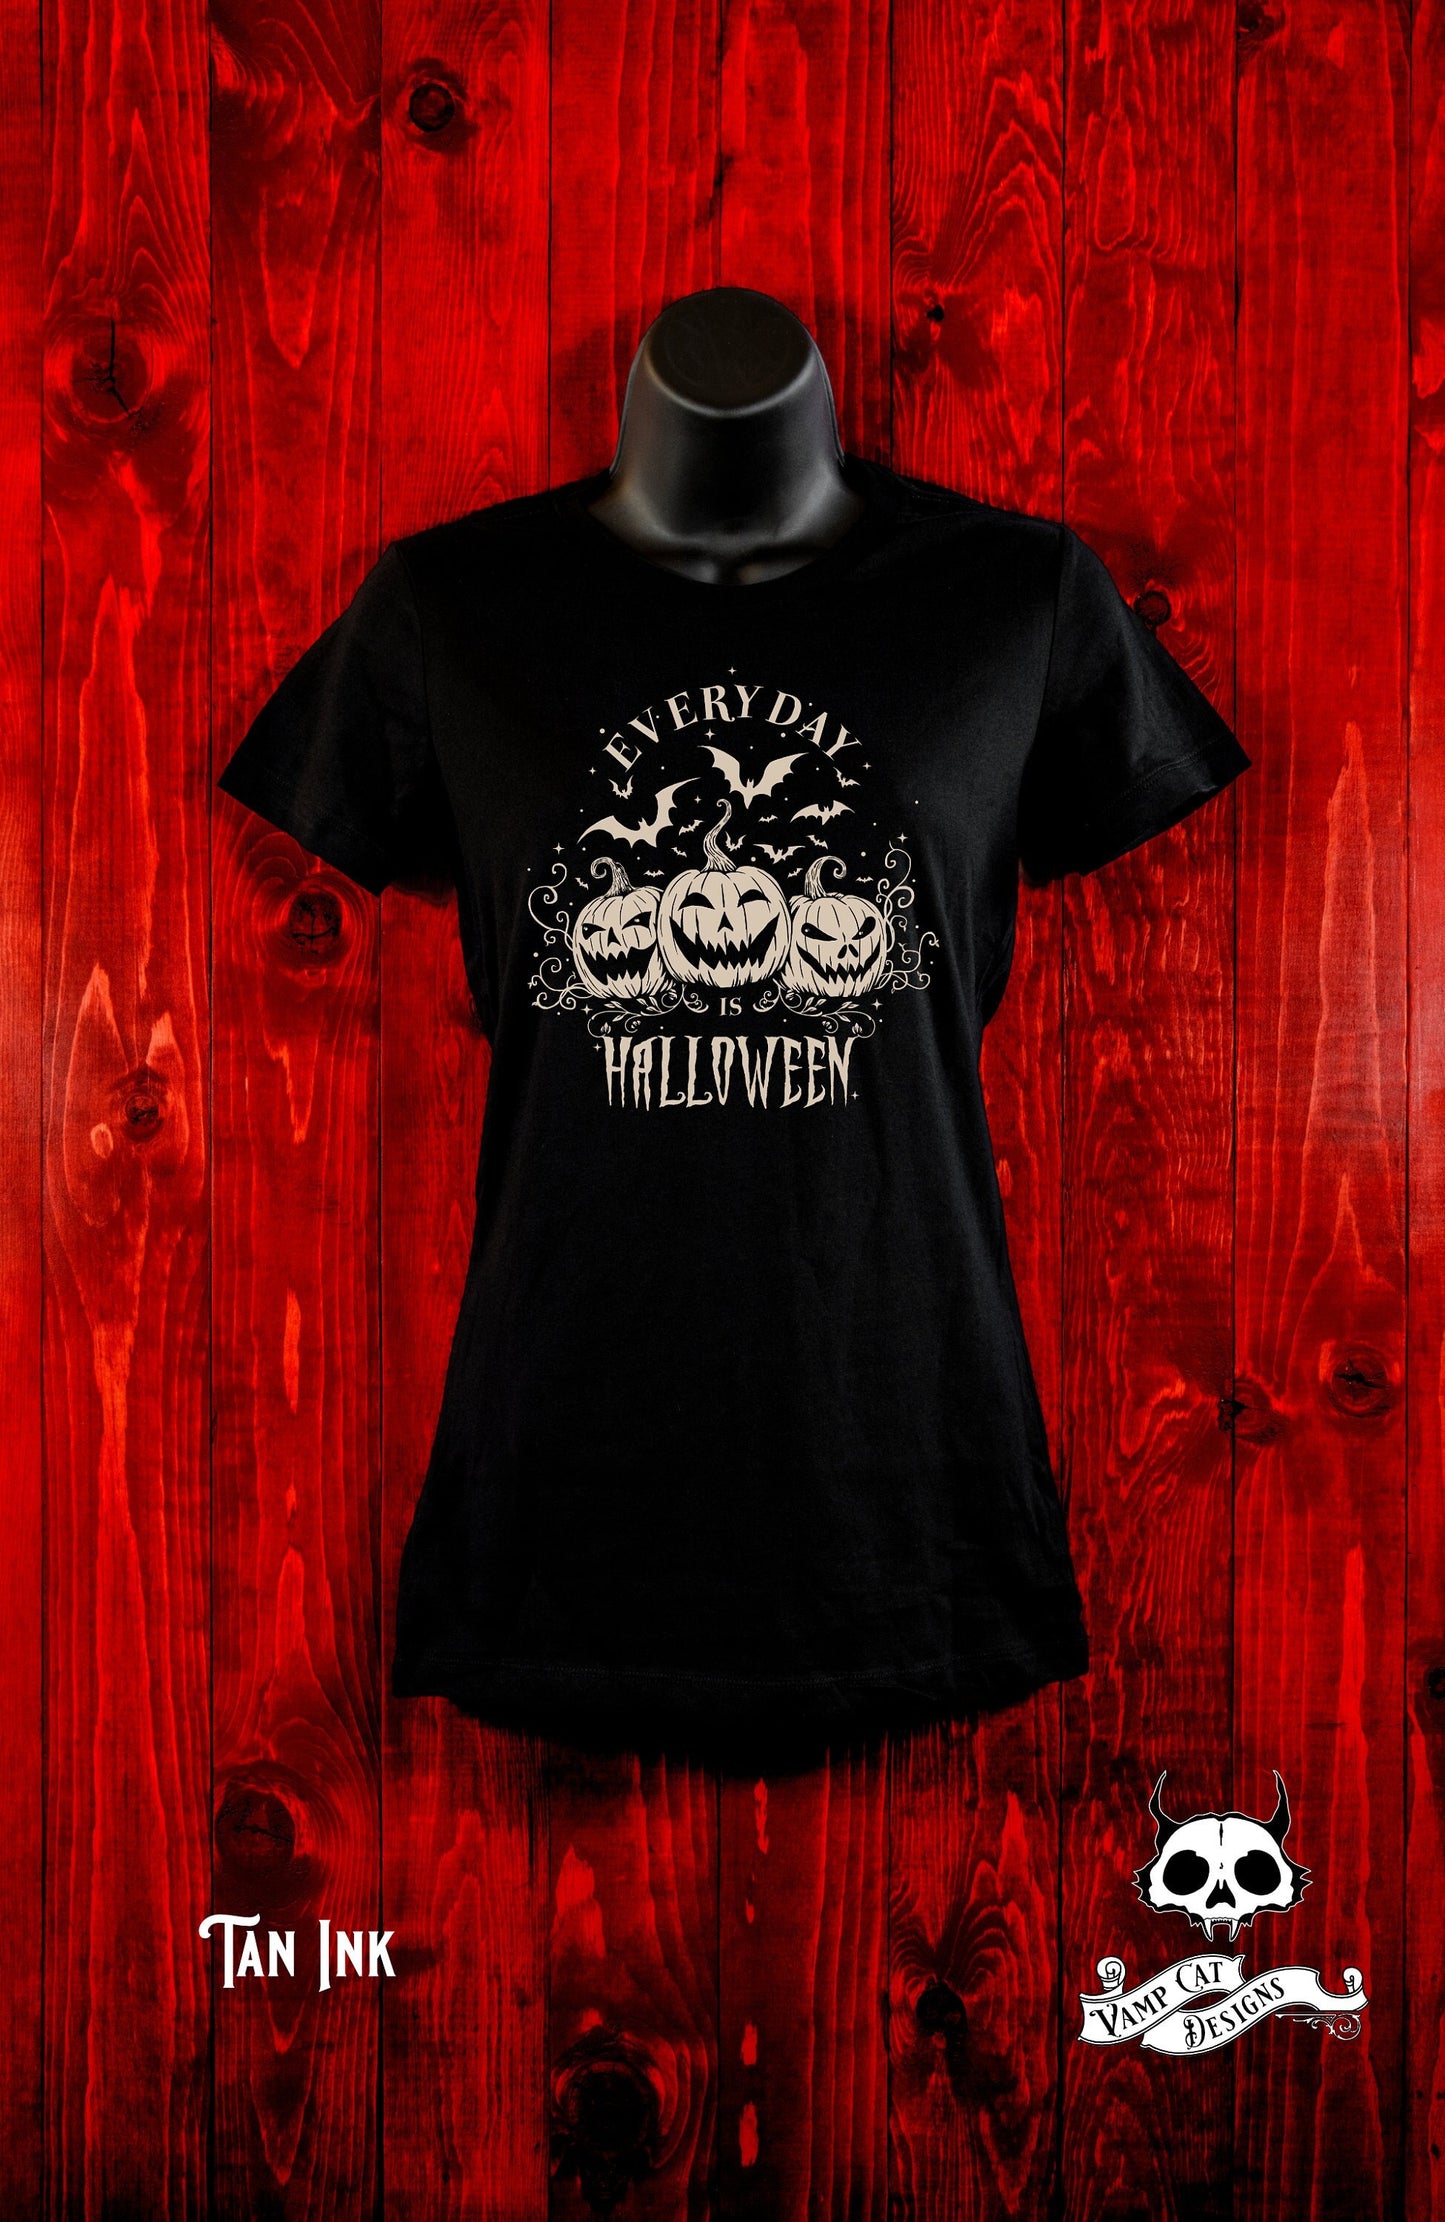 Everyday Is Halloween-Women's T-Shirt-Halloween Art-Halloween Apparel-Witchy-Gothic-Jack O' Lantern Graphic Tee-Bats And Jack O' Lanterns